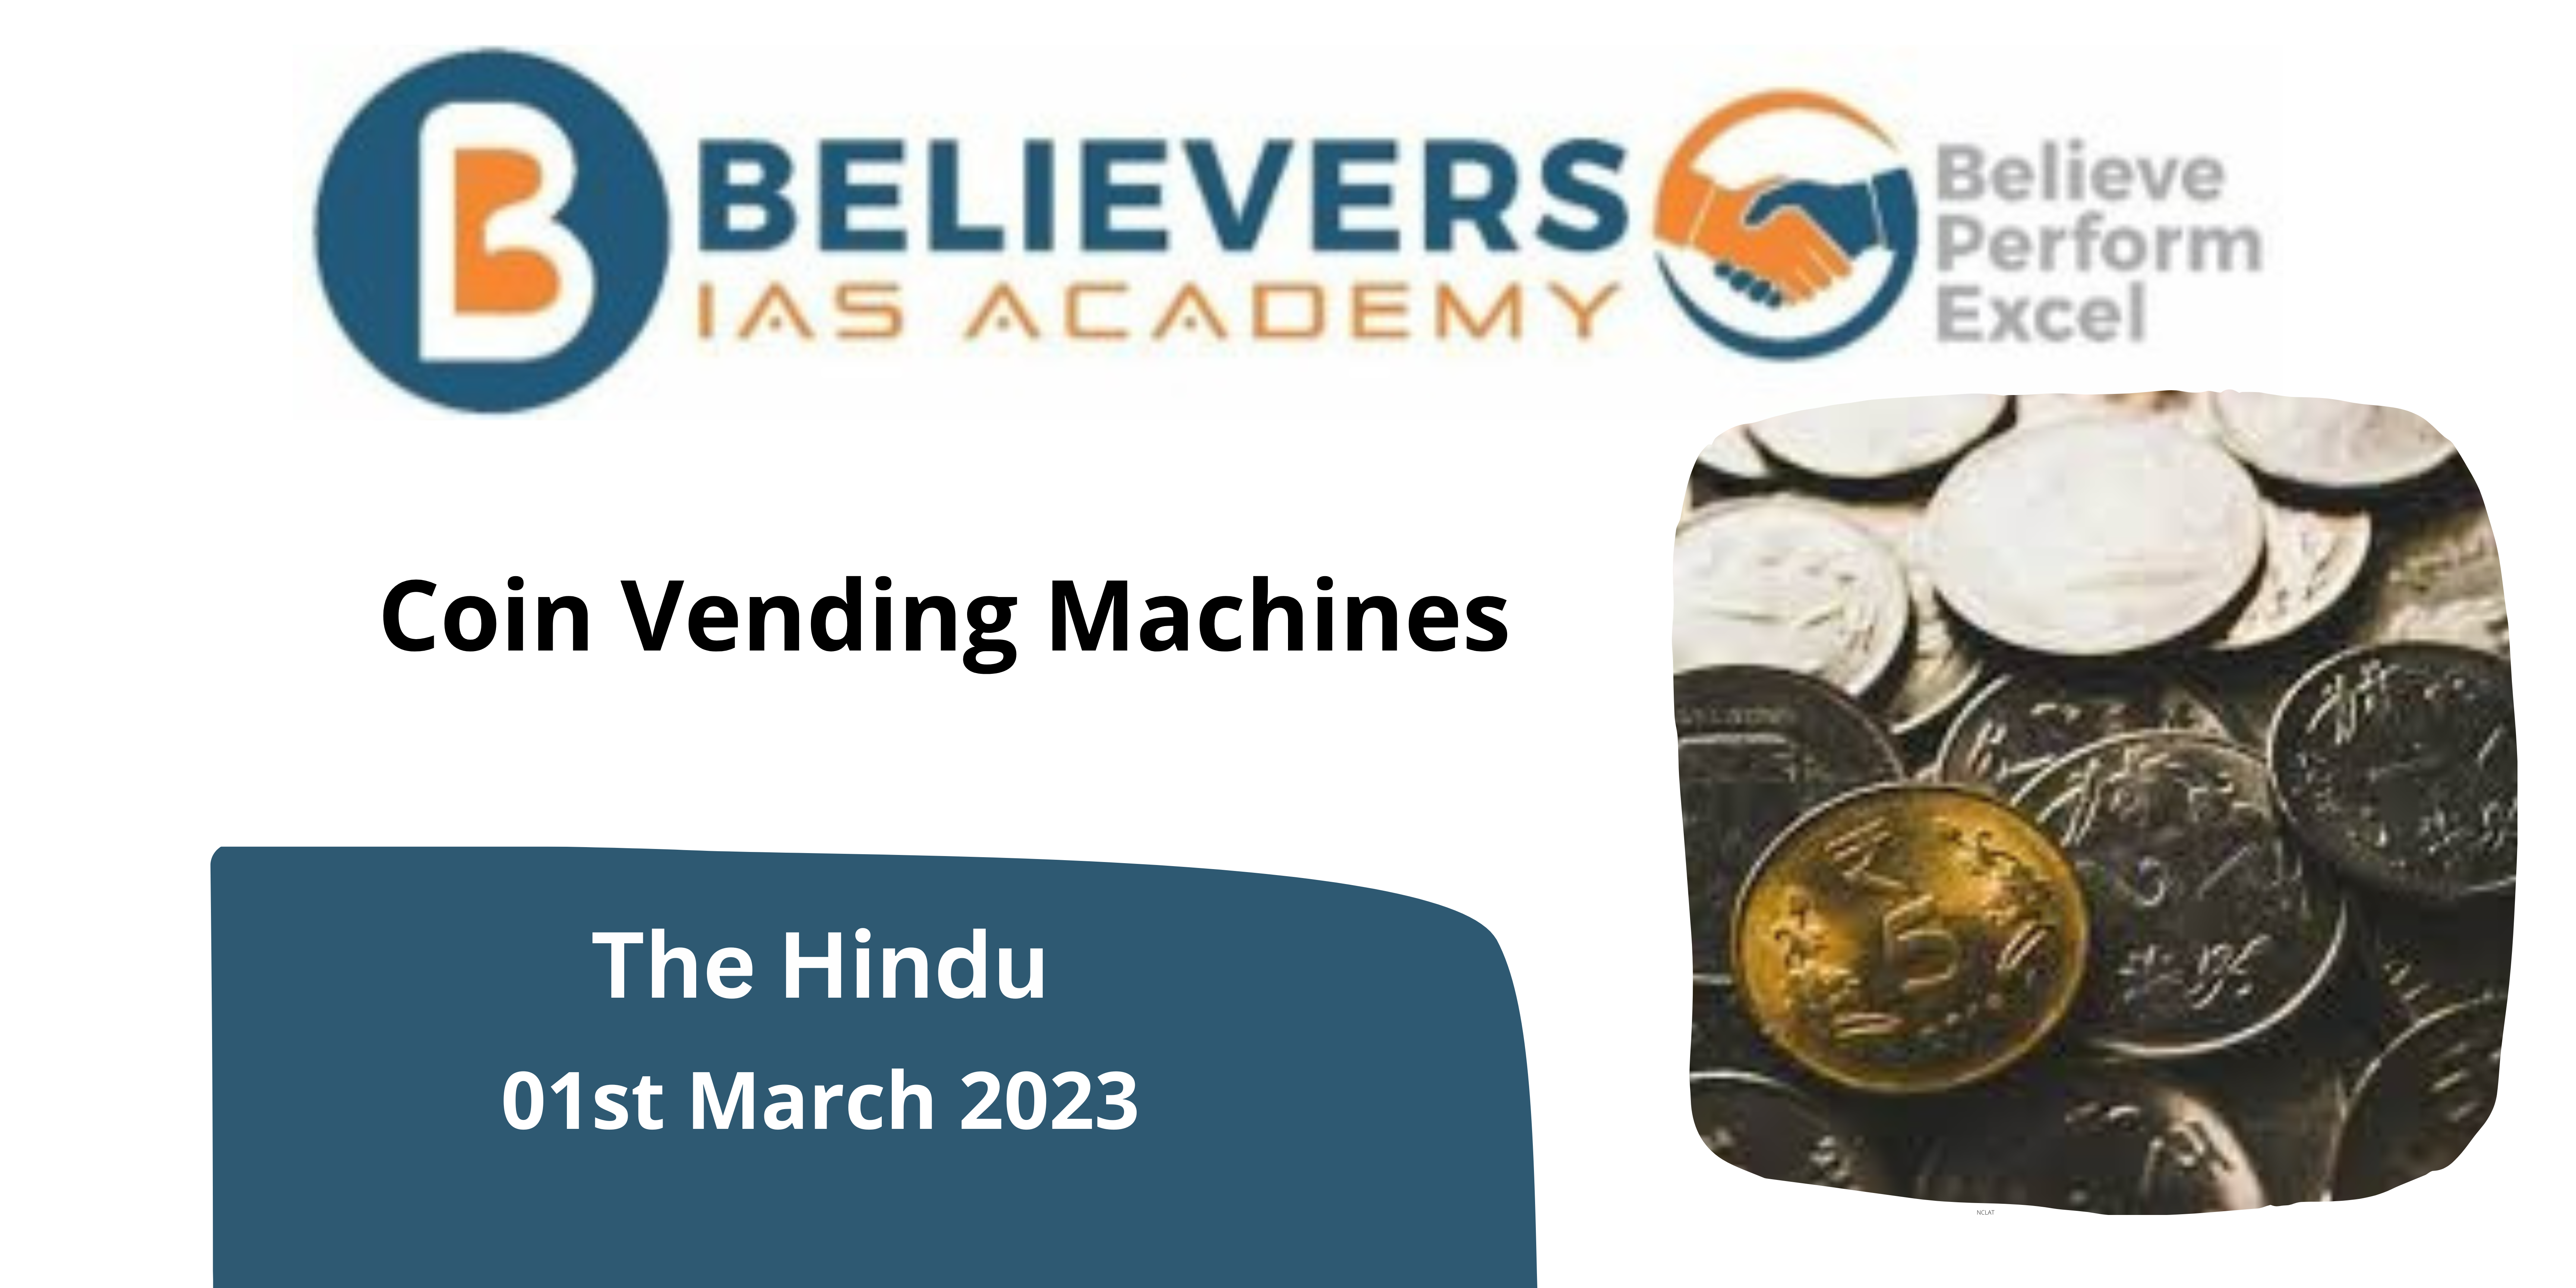 Coin Vending Machines: An Overview